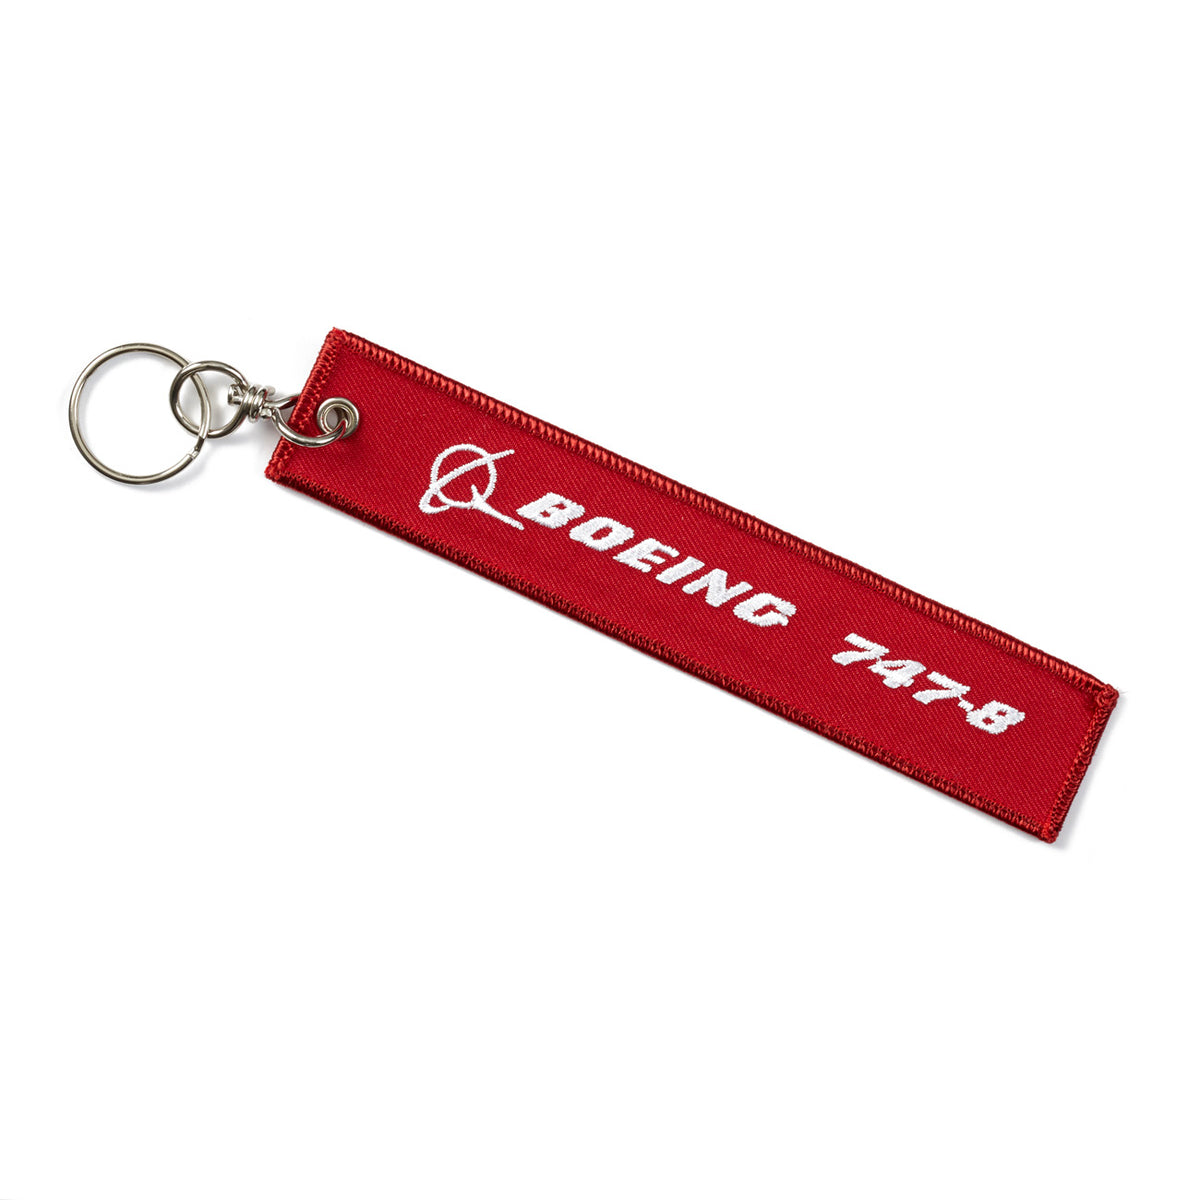 3 Inches KeyChain Remove Before Flight Sign (7NYBDPYYN) by HOLDEN8702